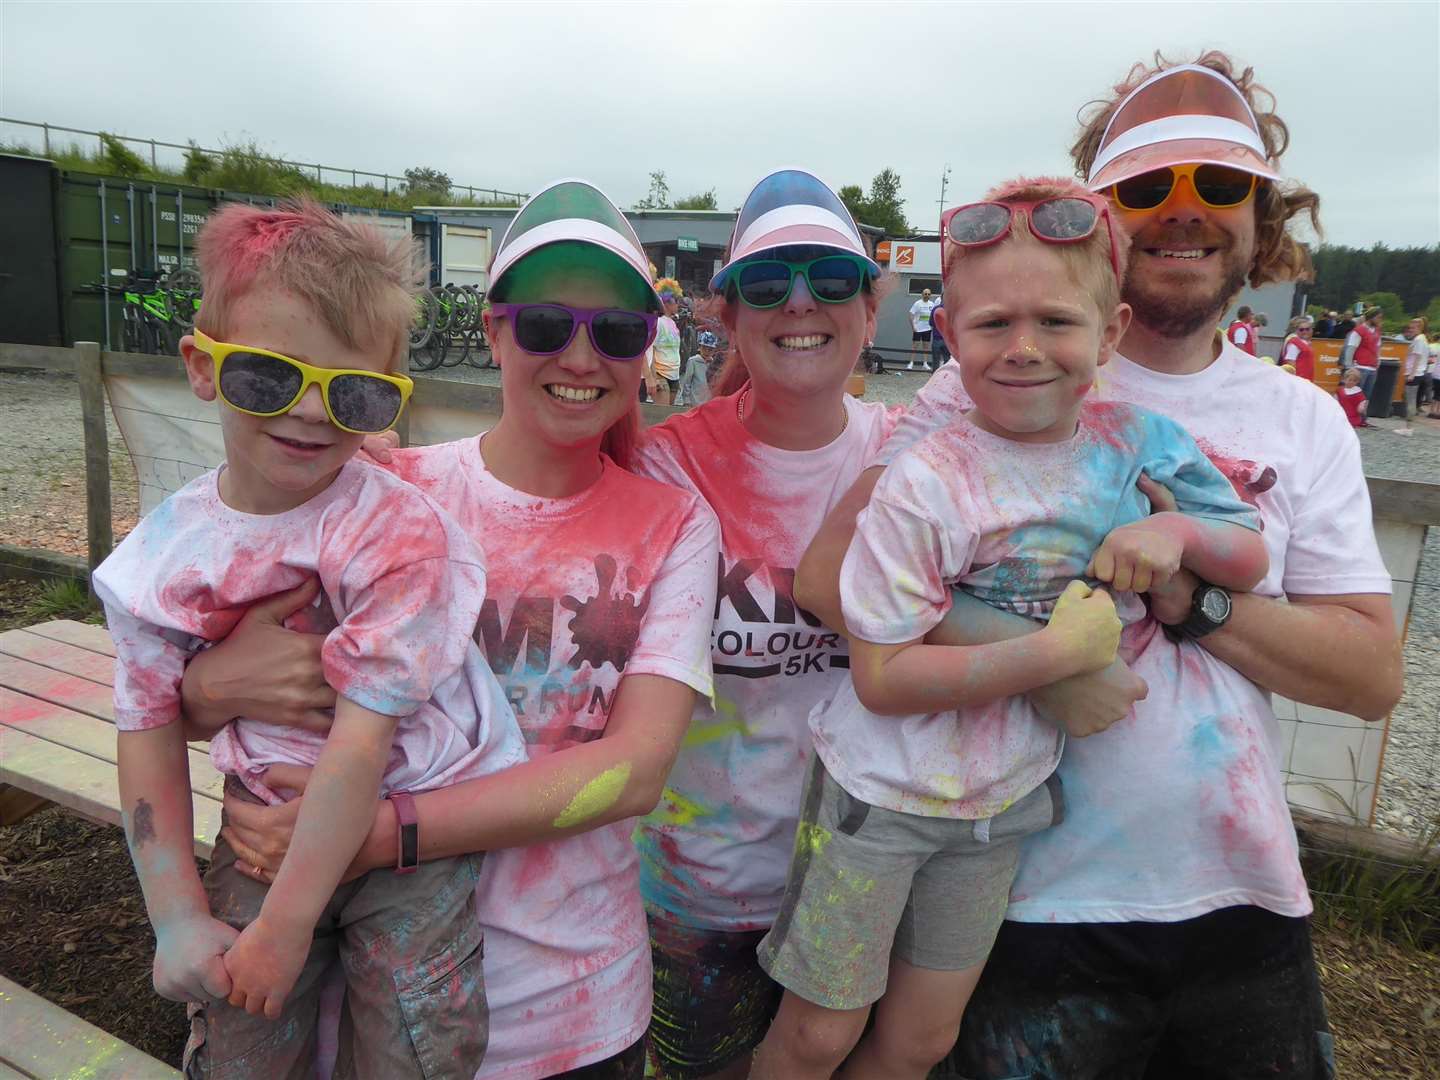 Sarah Pomeroy with family and friends of Herne Bay and Whitstable at the KM Colour Run 2018. (2471144)